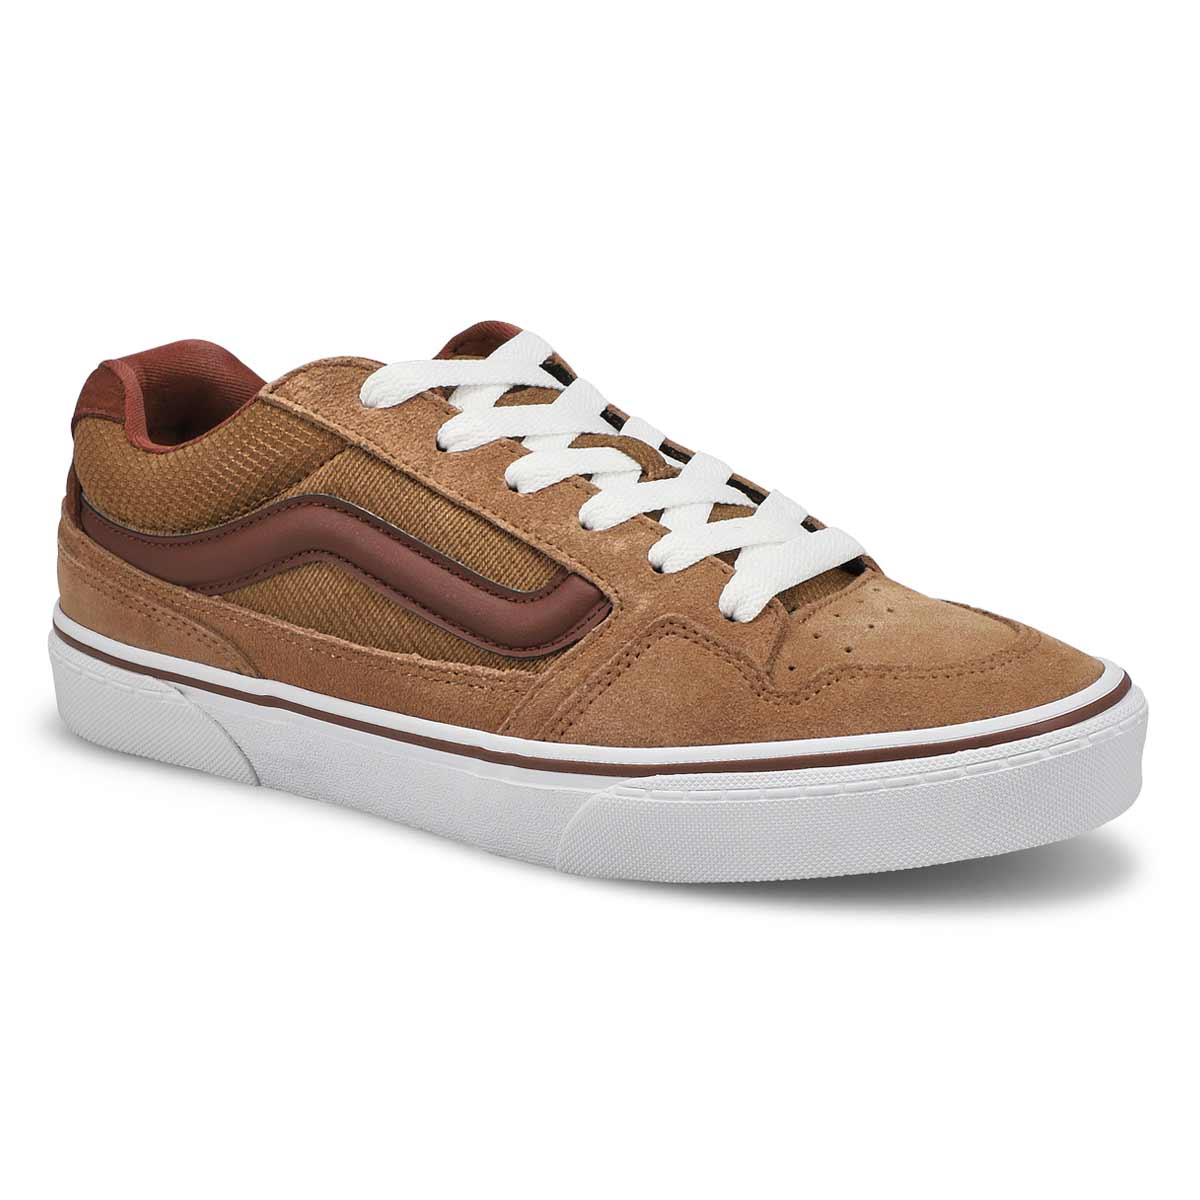 Men's Caldrone Lace Up Sneaker - Brown